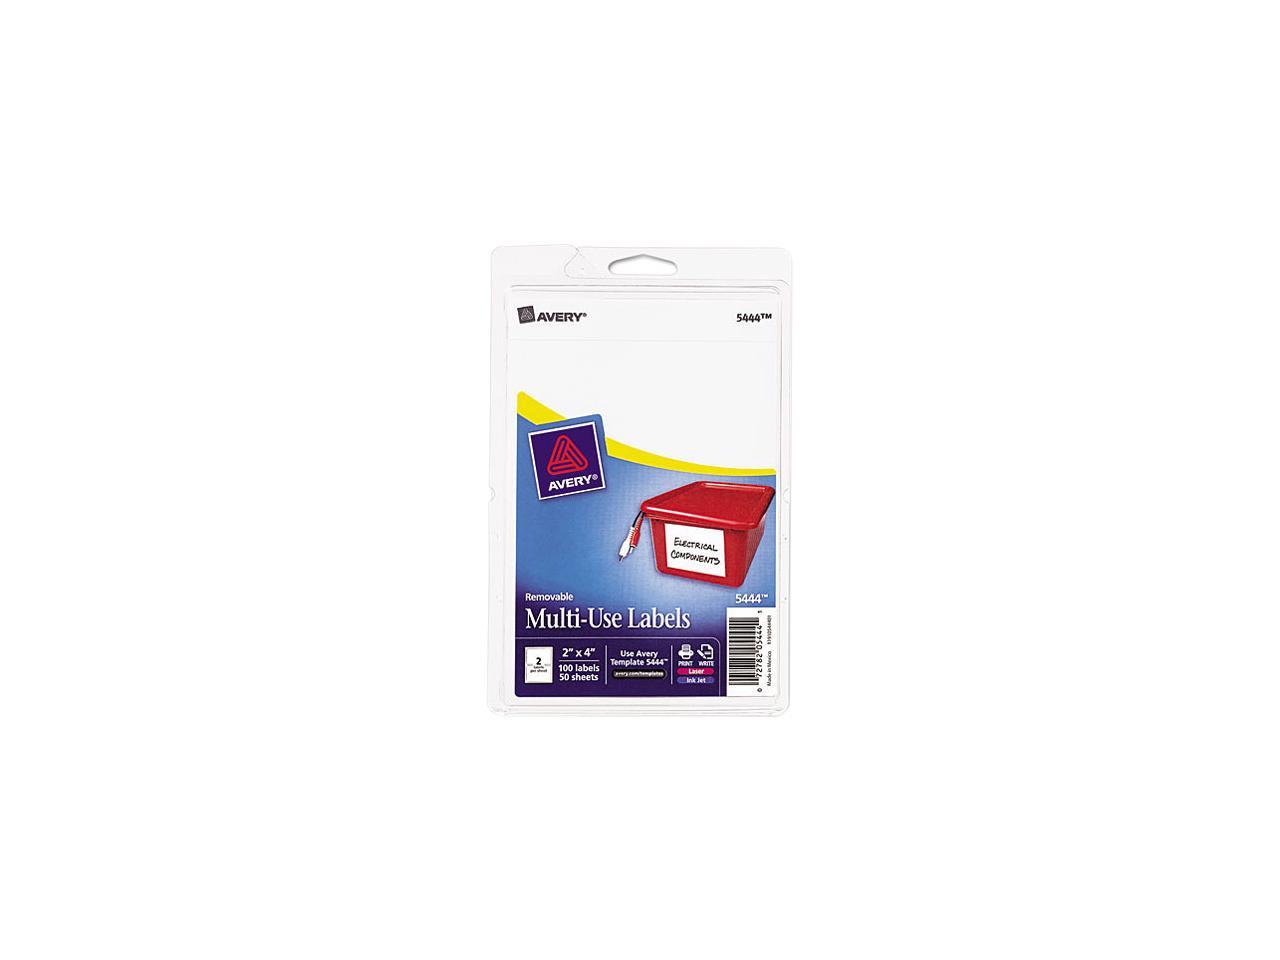 Avery 05444 Print or Write Removable MultiUse Labels, 2 x 4, White